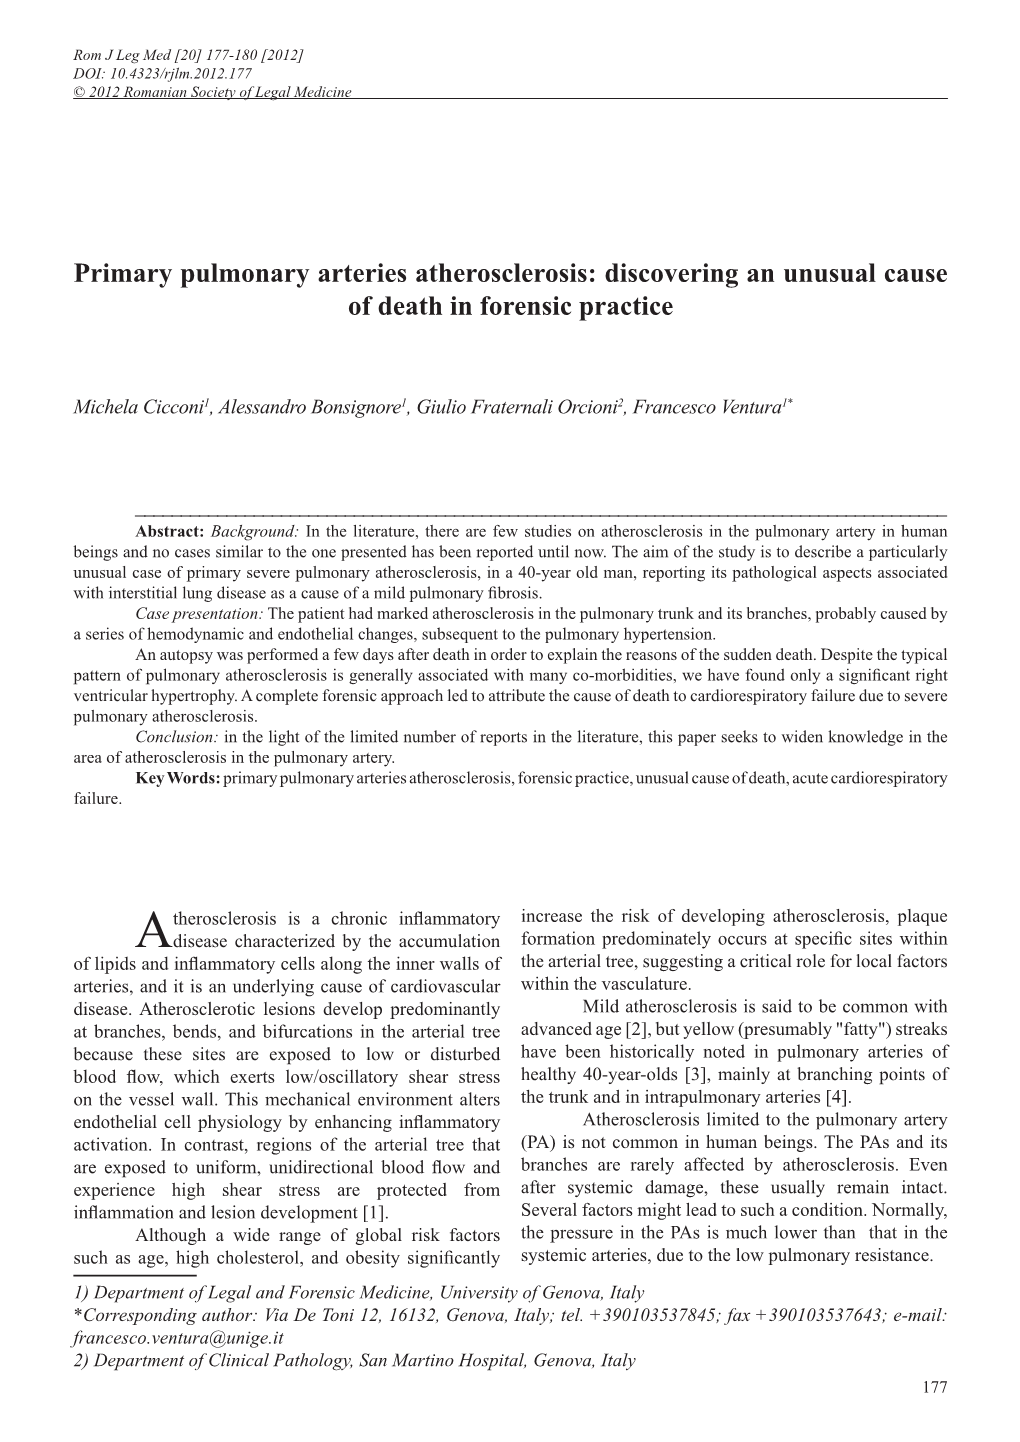 Primary Pulmonary Arteries Atherosclerosis: Discovering an Unusual Cause of Death in Forensic Practice